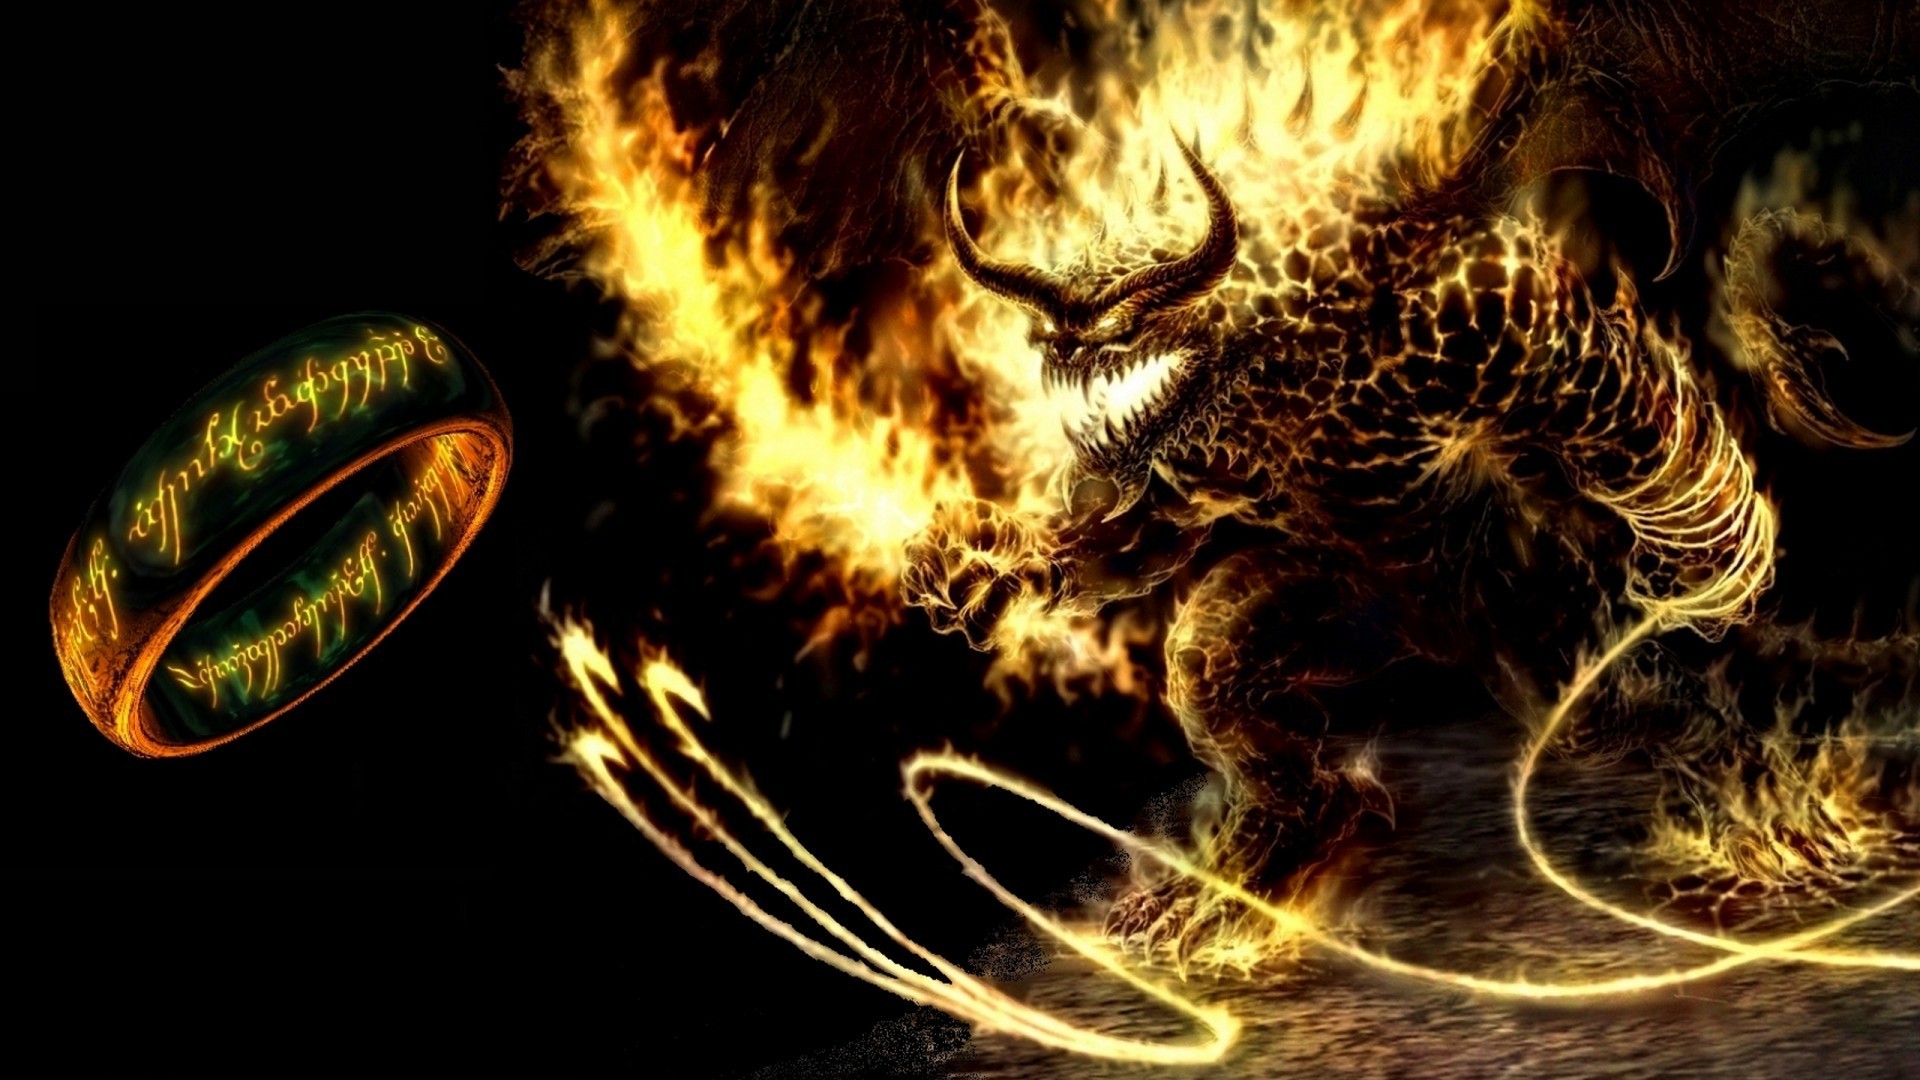 The Lord Of The Rings Balrog Rings Middle Earth Fantasy Art Black Background Fire Demon Creature 1920x1080